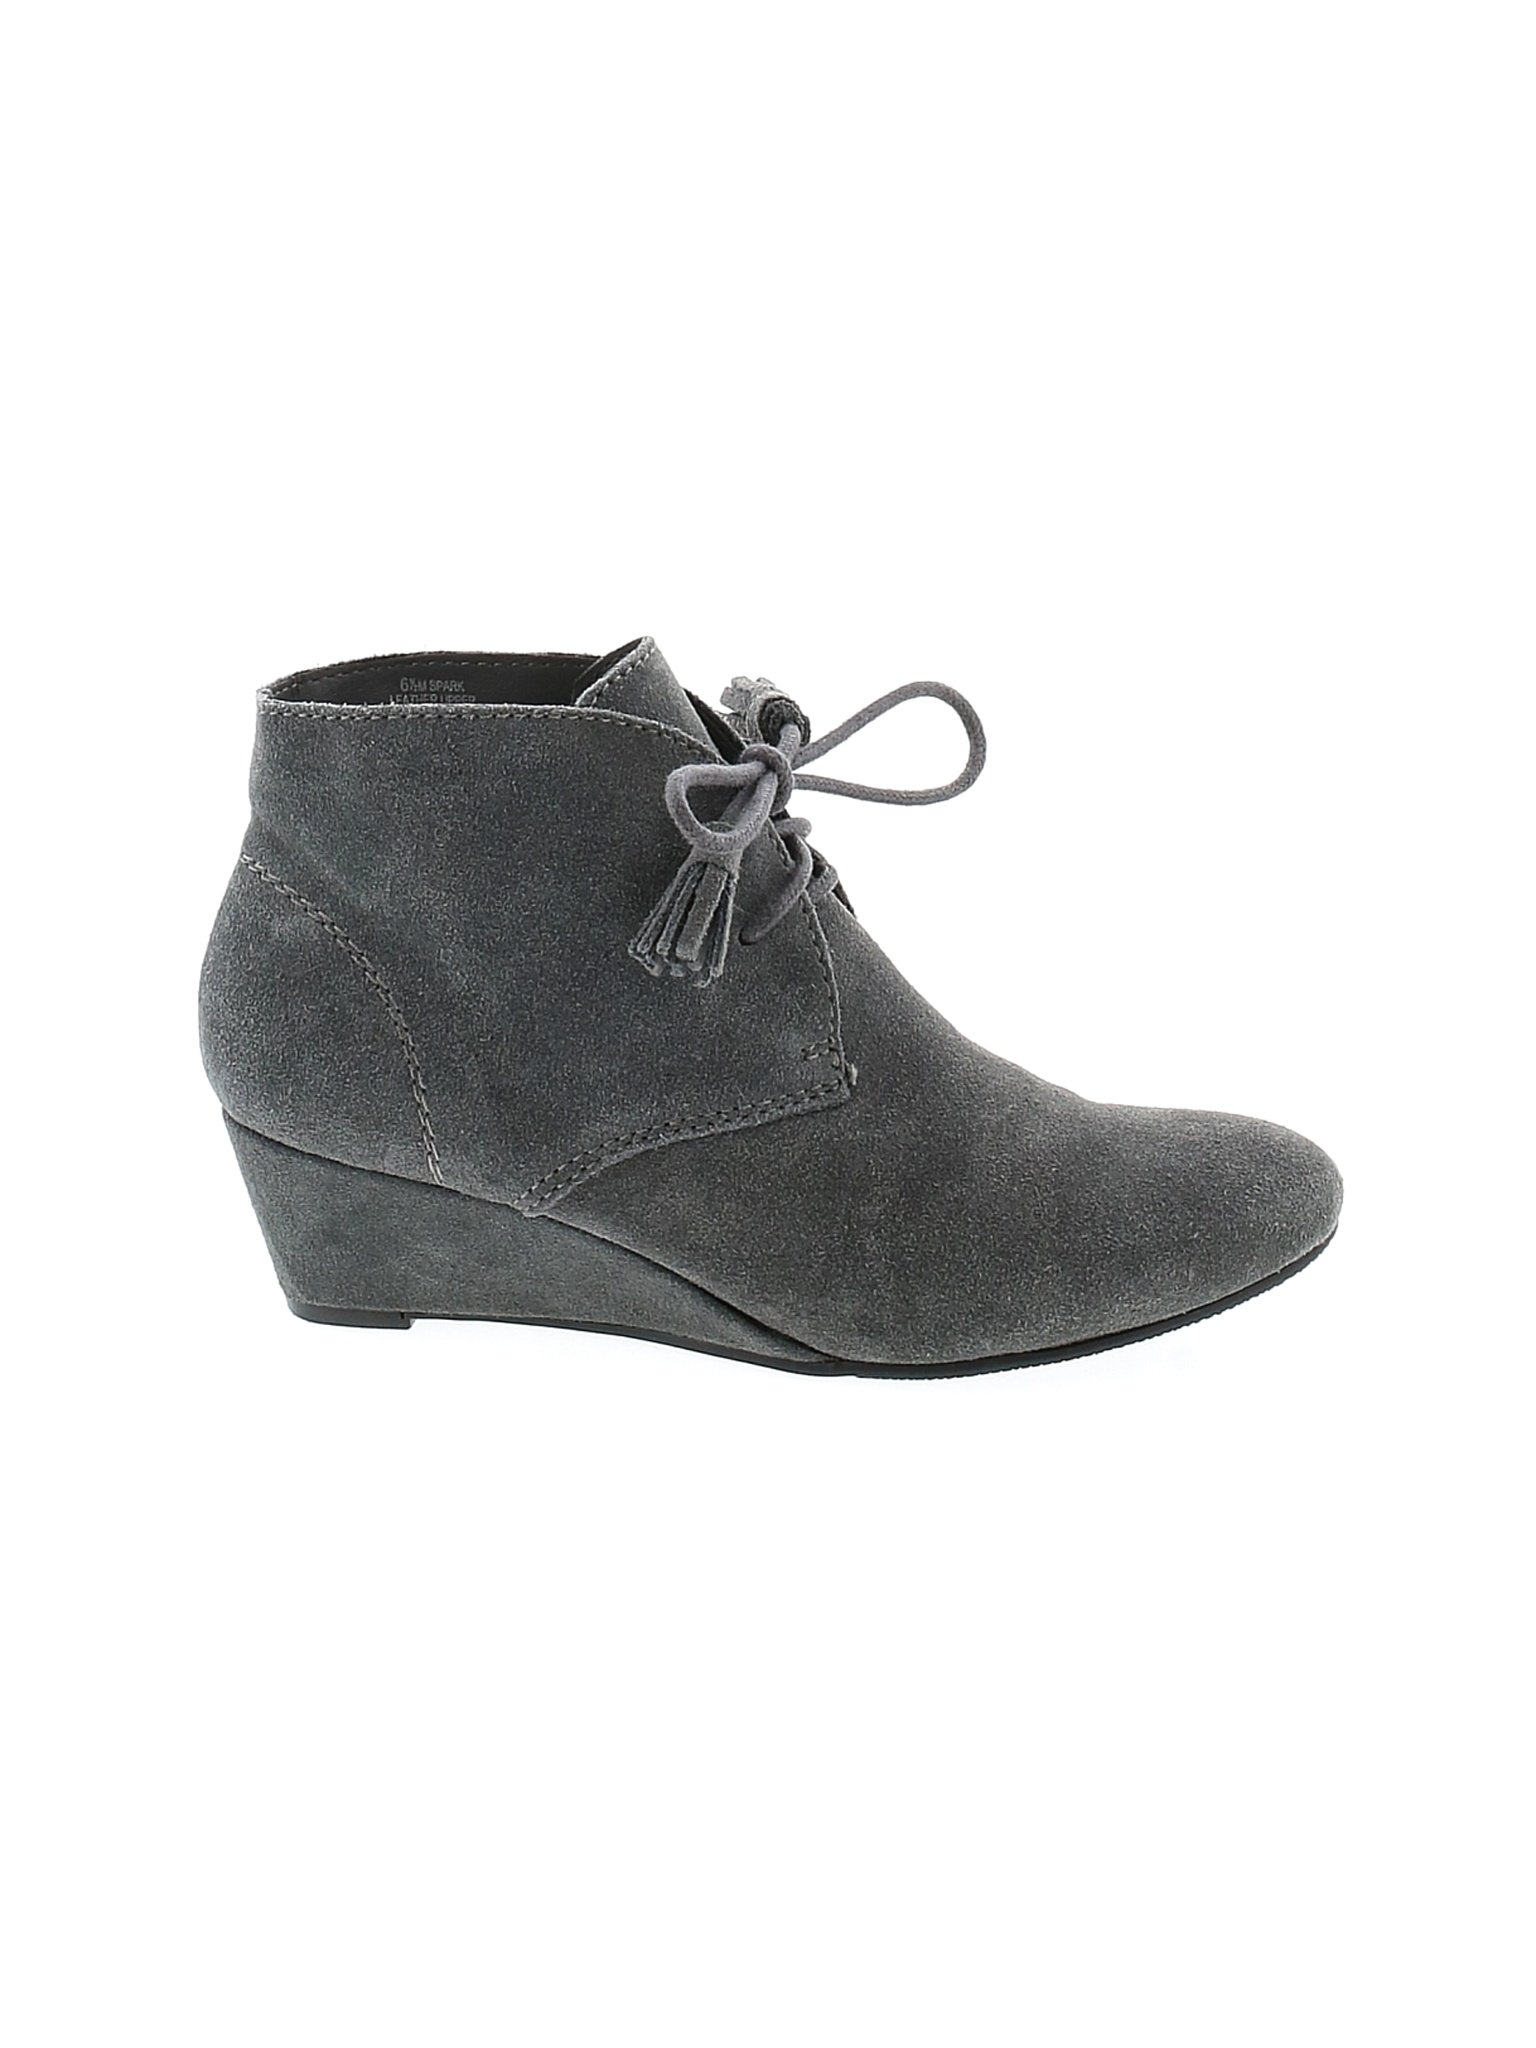 Crown Vintage Women Gray Ankle Boots US 6.5 | eBay